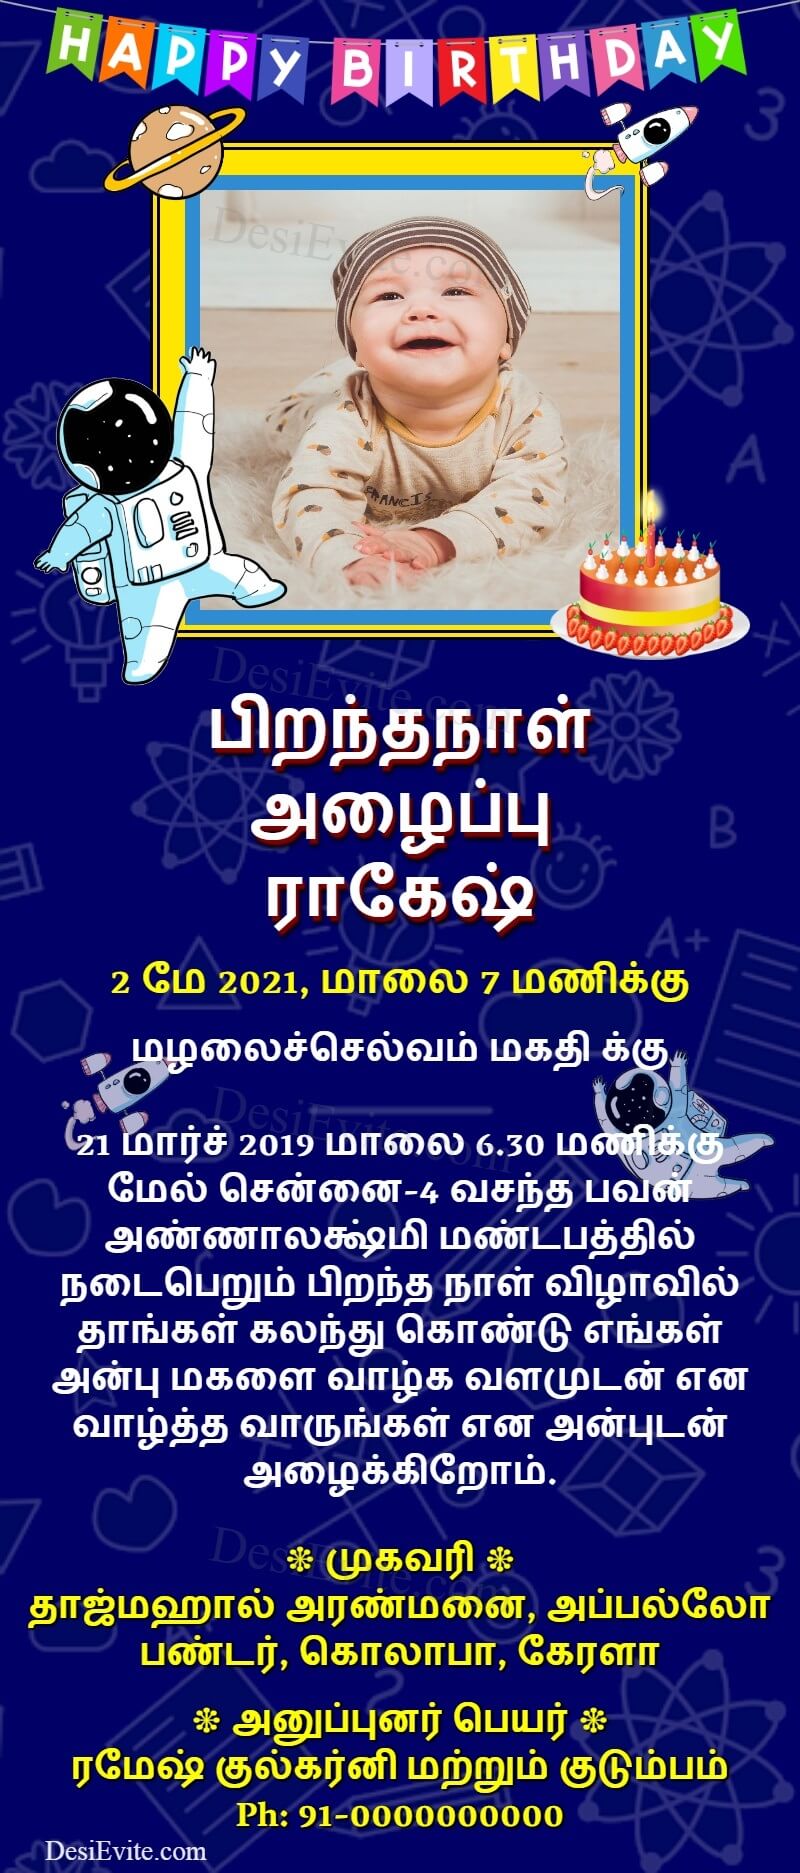 Tamil science theme birthday card for whatsapp template 74